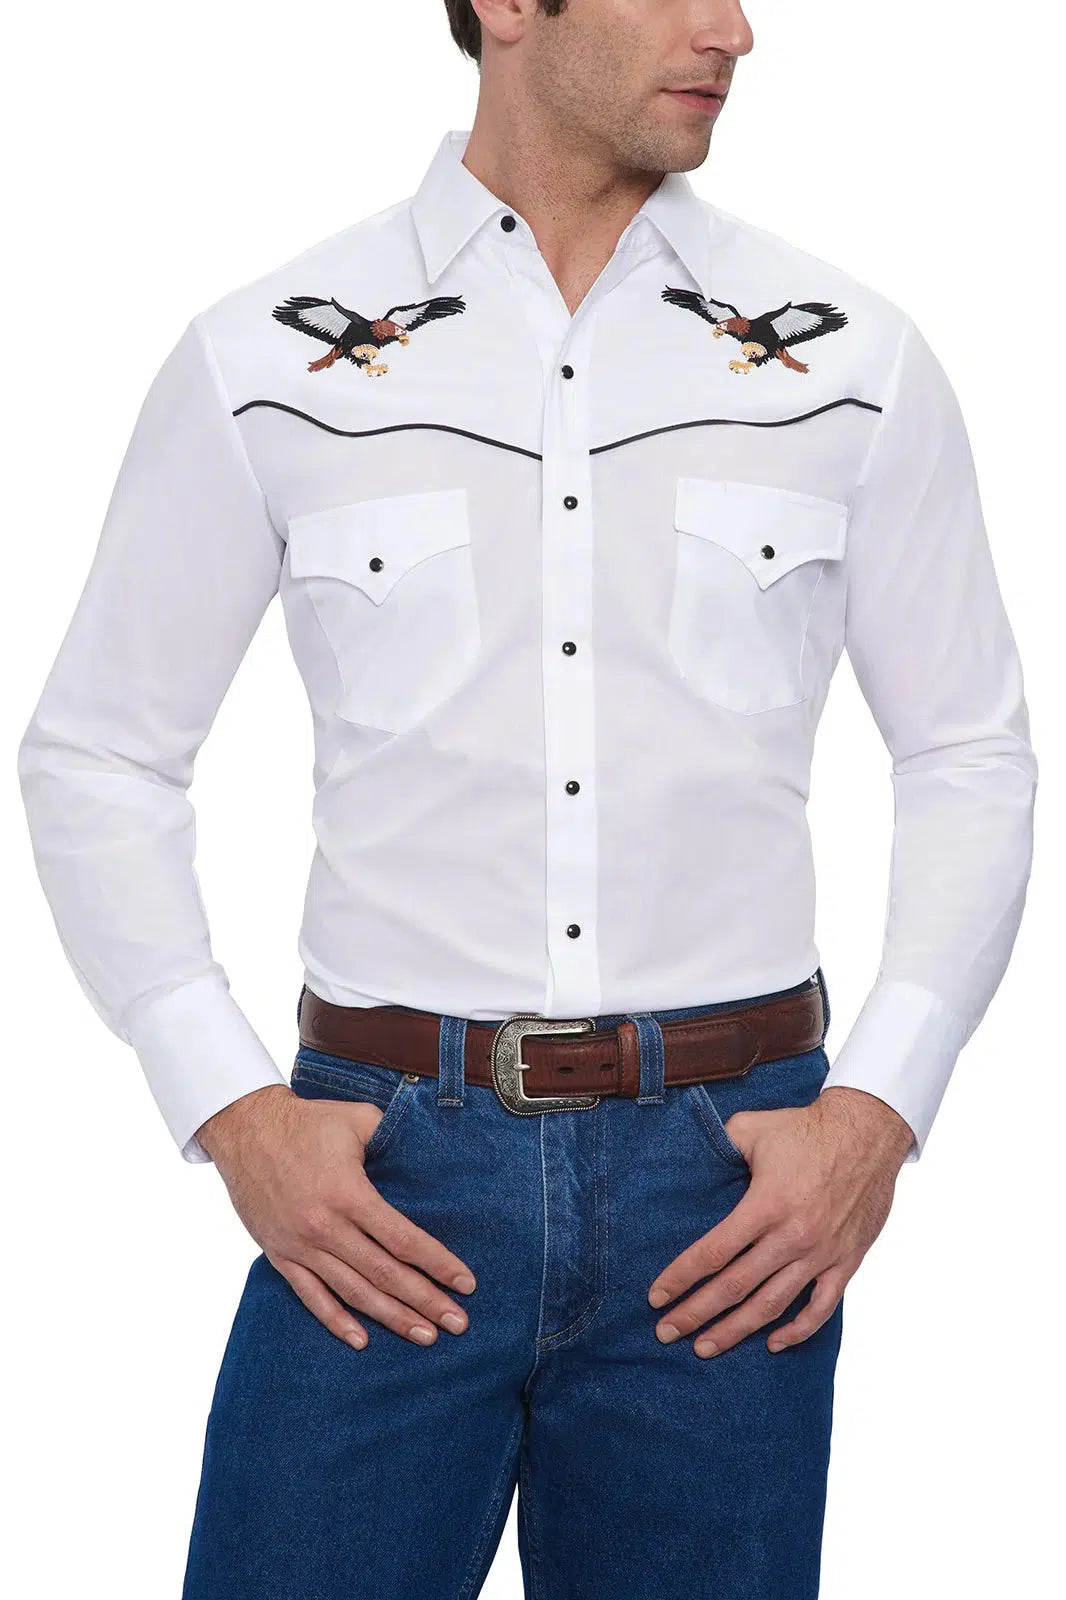 A man wearing an Ely embroidered eagle western shirt and jeans, showcasing his American pride.